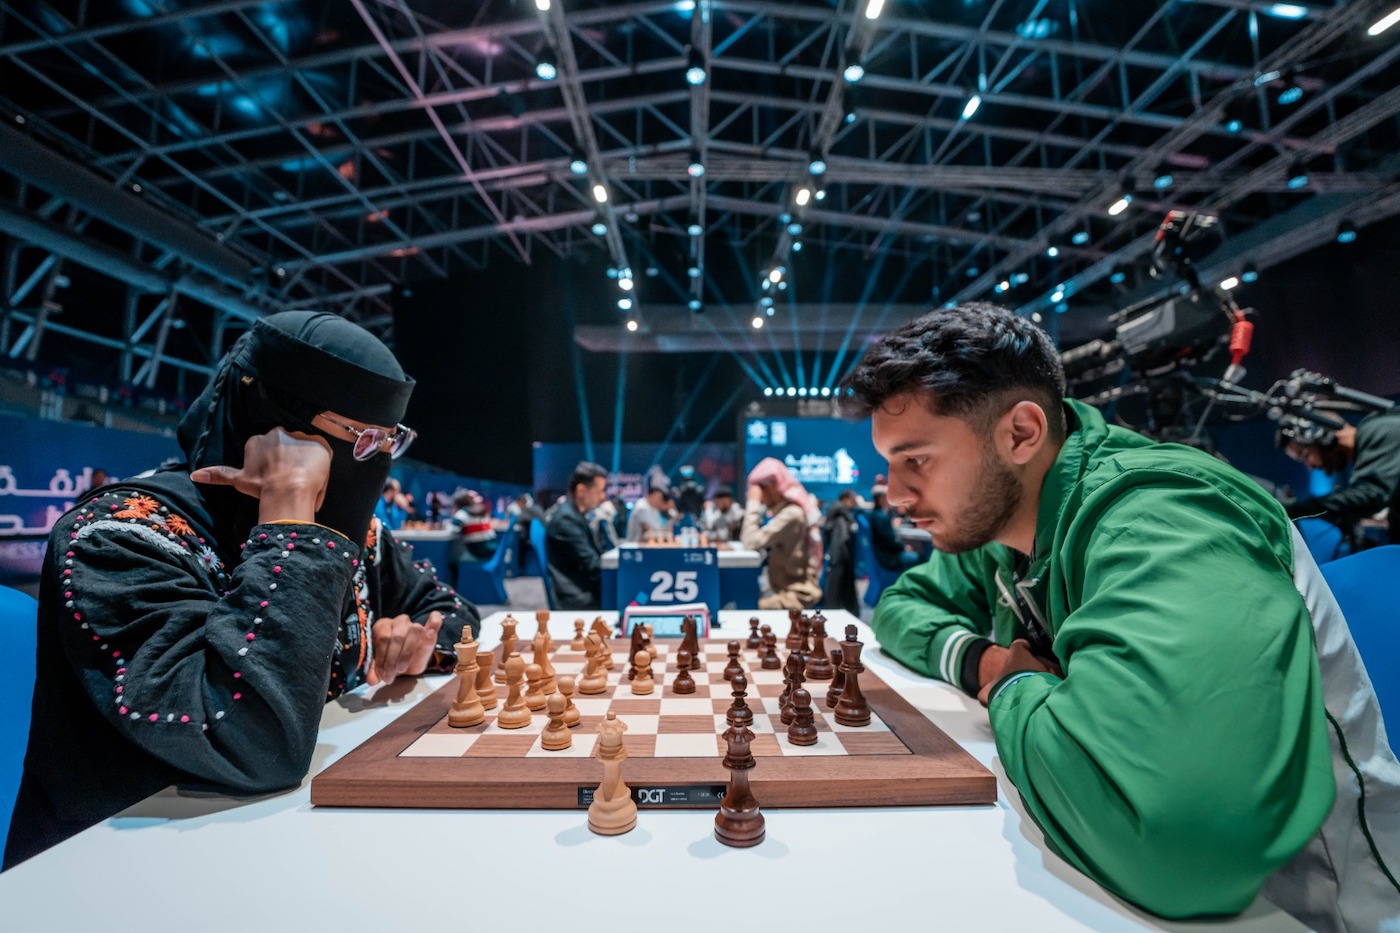 The Riyadh Calendar Chess Championship was organized by the General Entertainment Authority in cooperation with the Saudi Chess Federation. (Supplied)